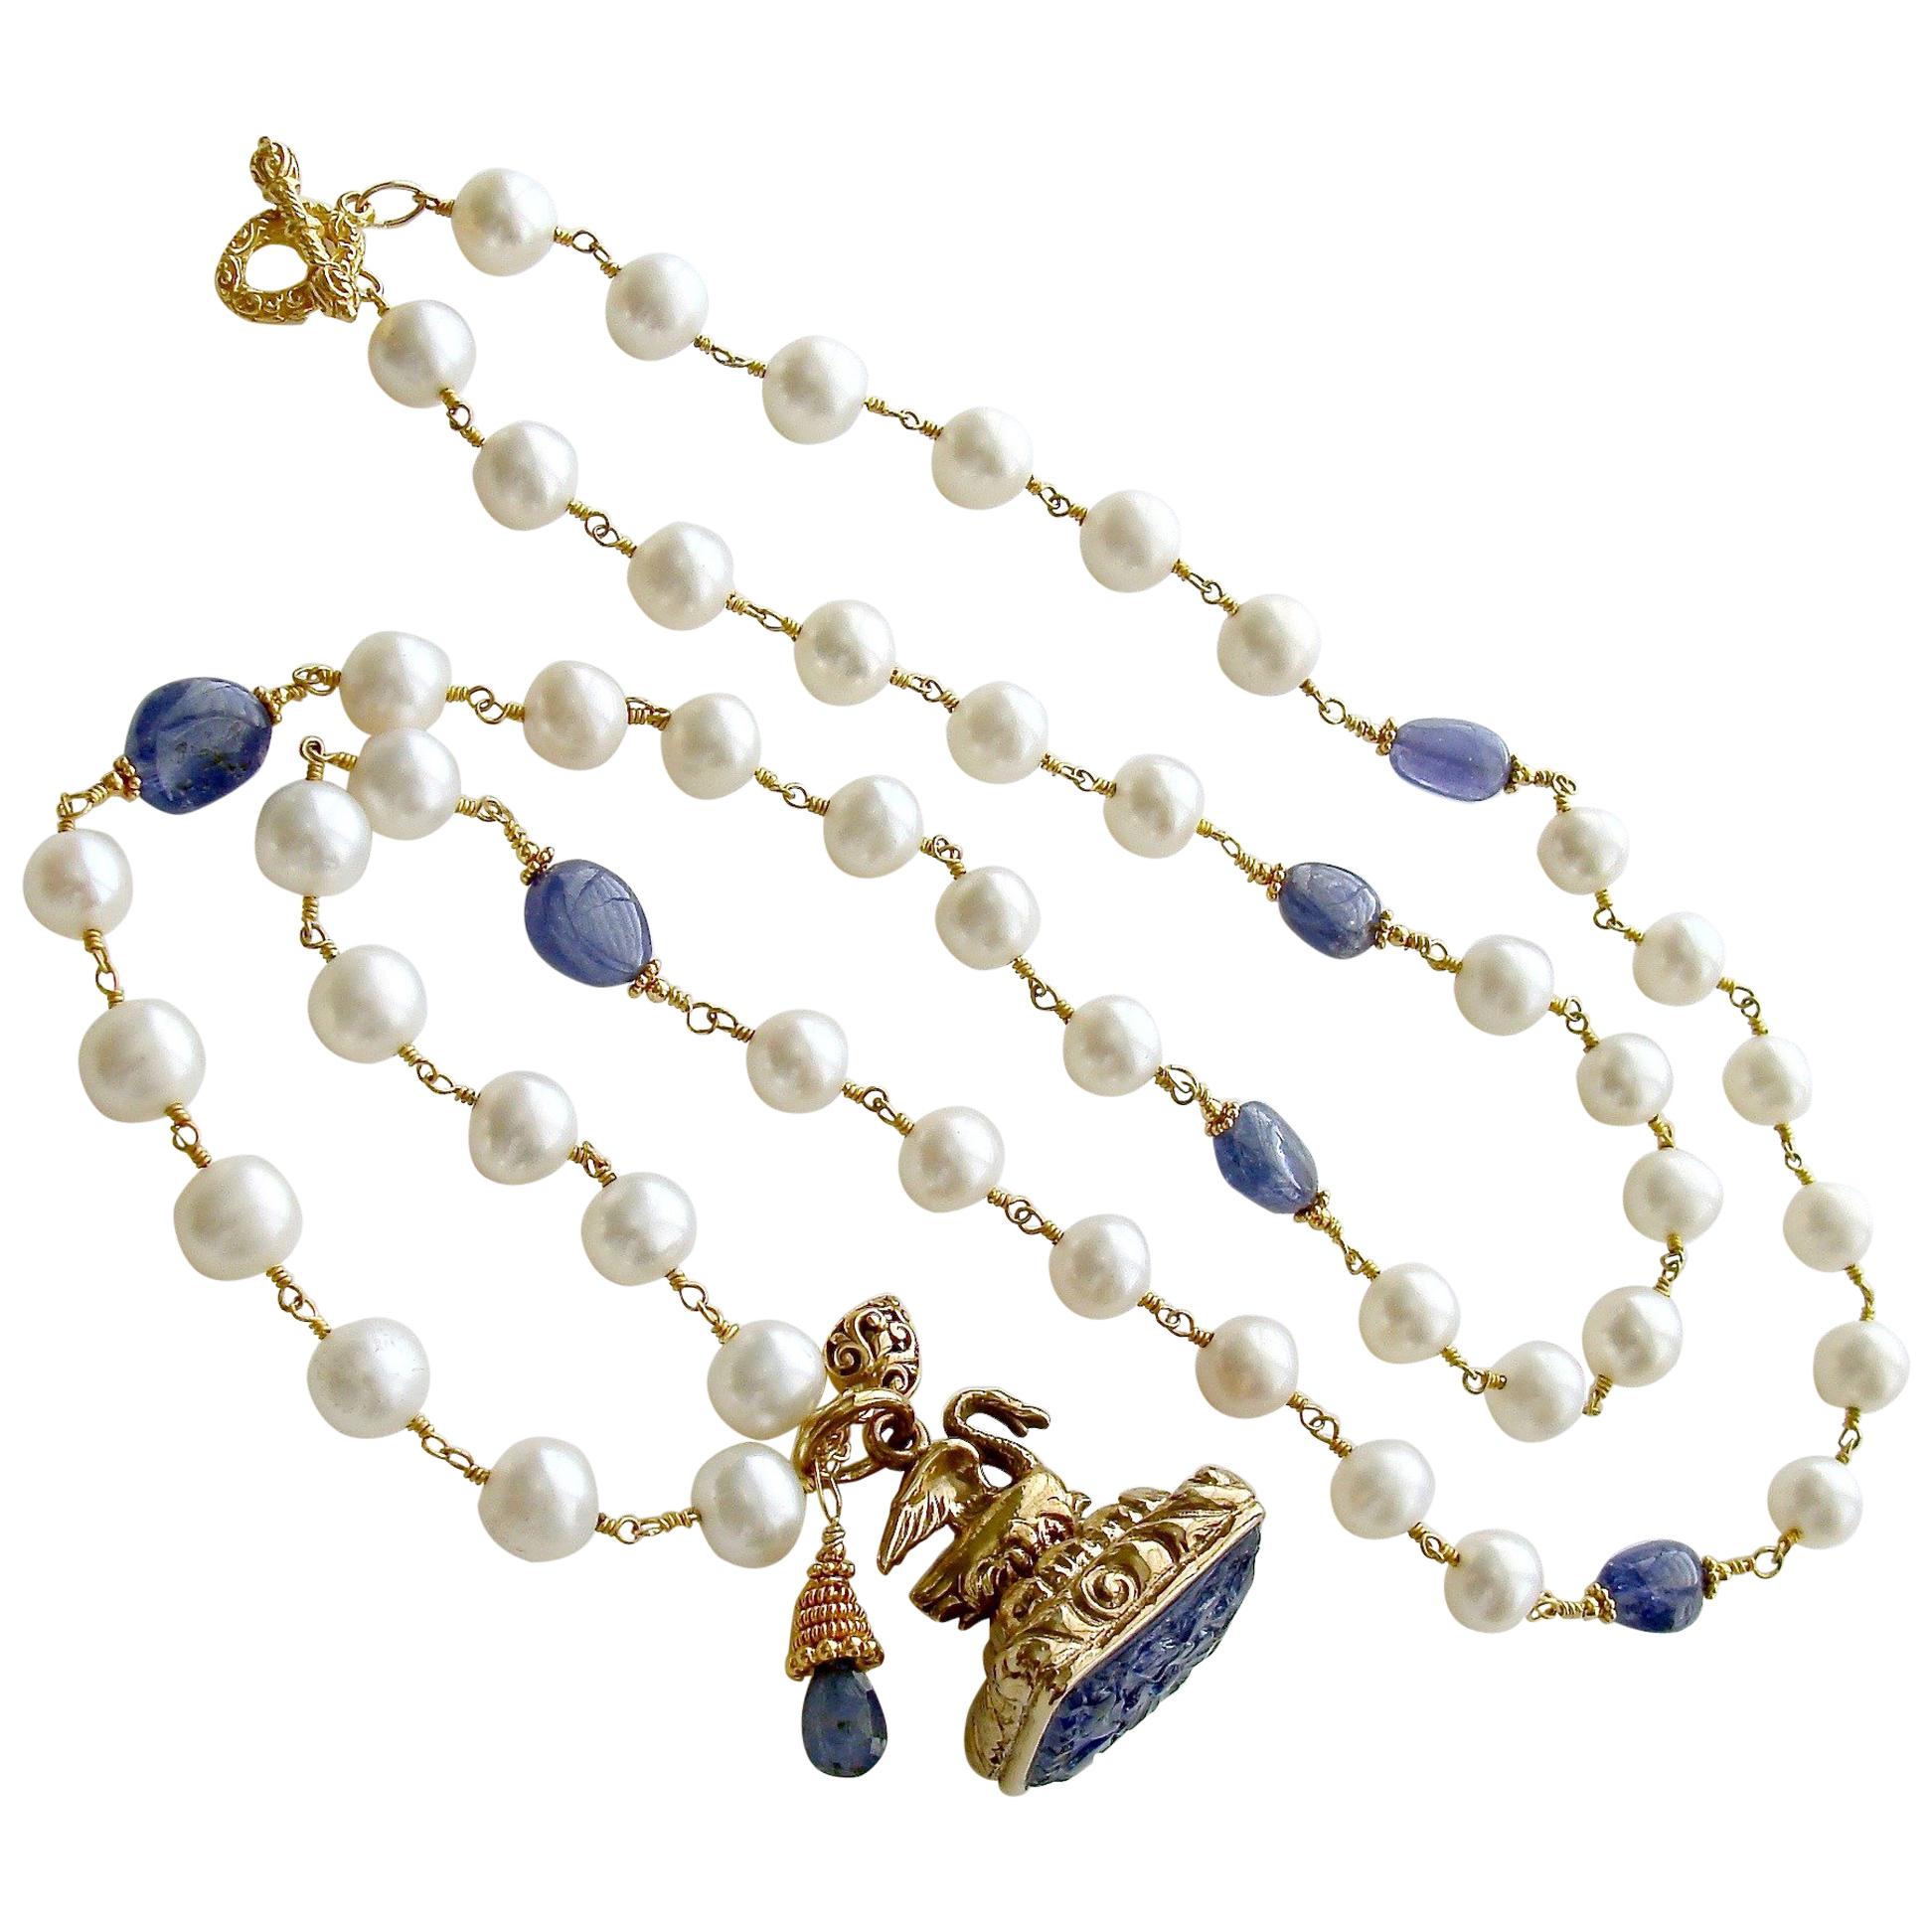 Tanzanite Nuggets and Freshwater Pearls Hand-Carved Tanzanite Swan Fob Necklace